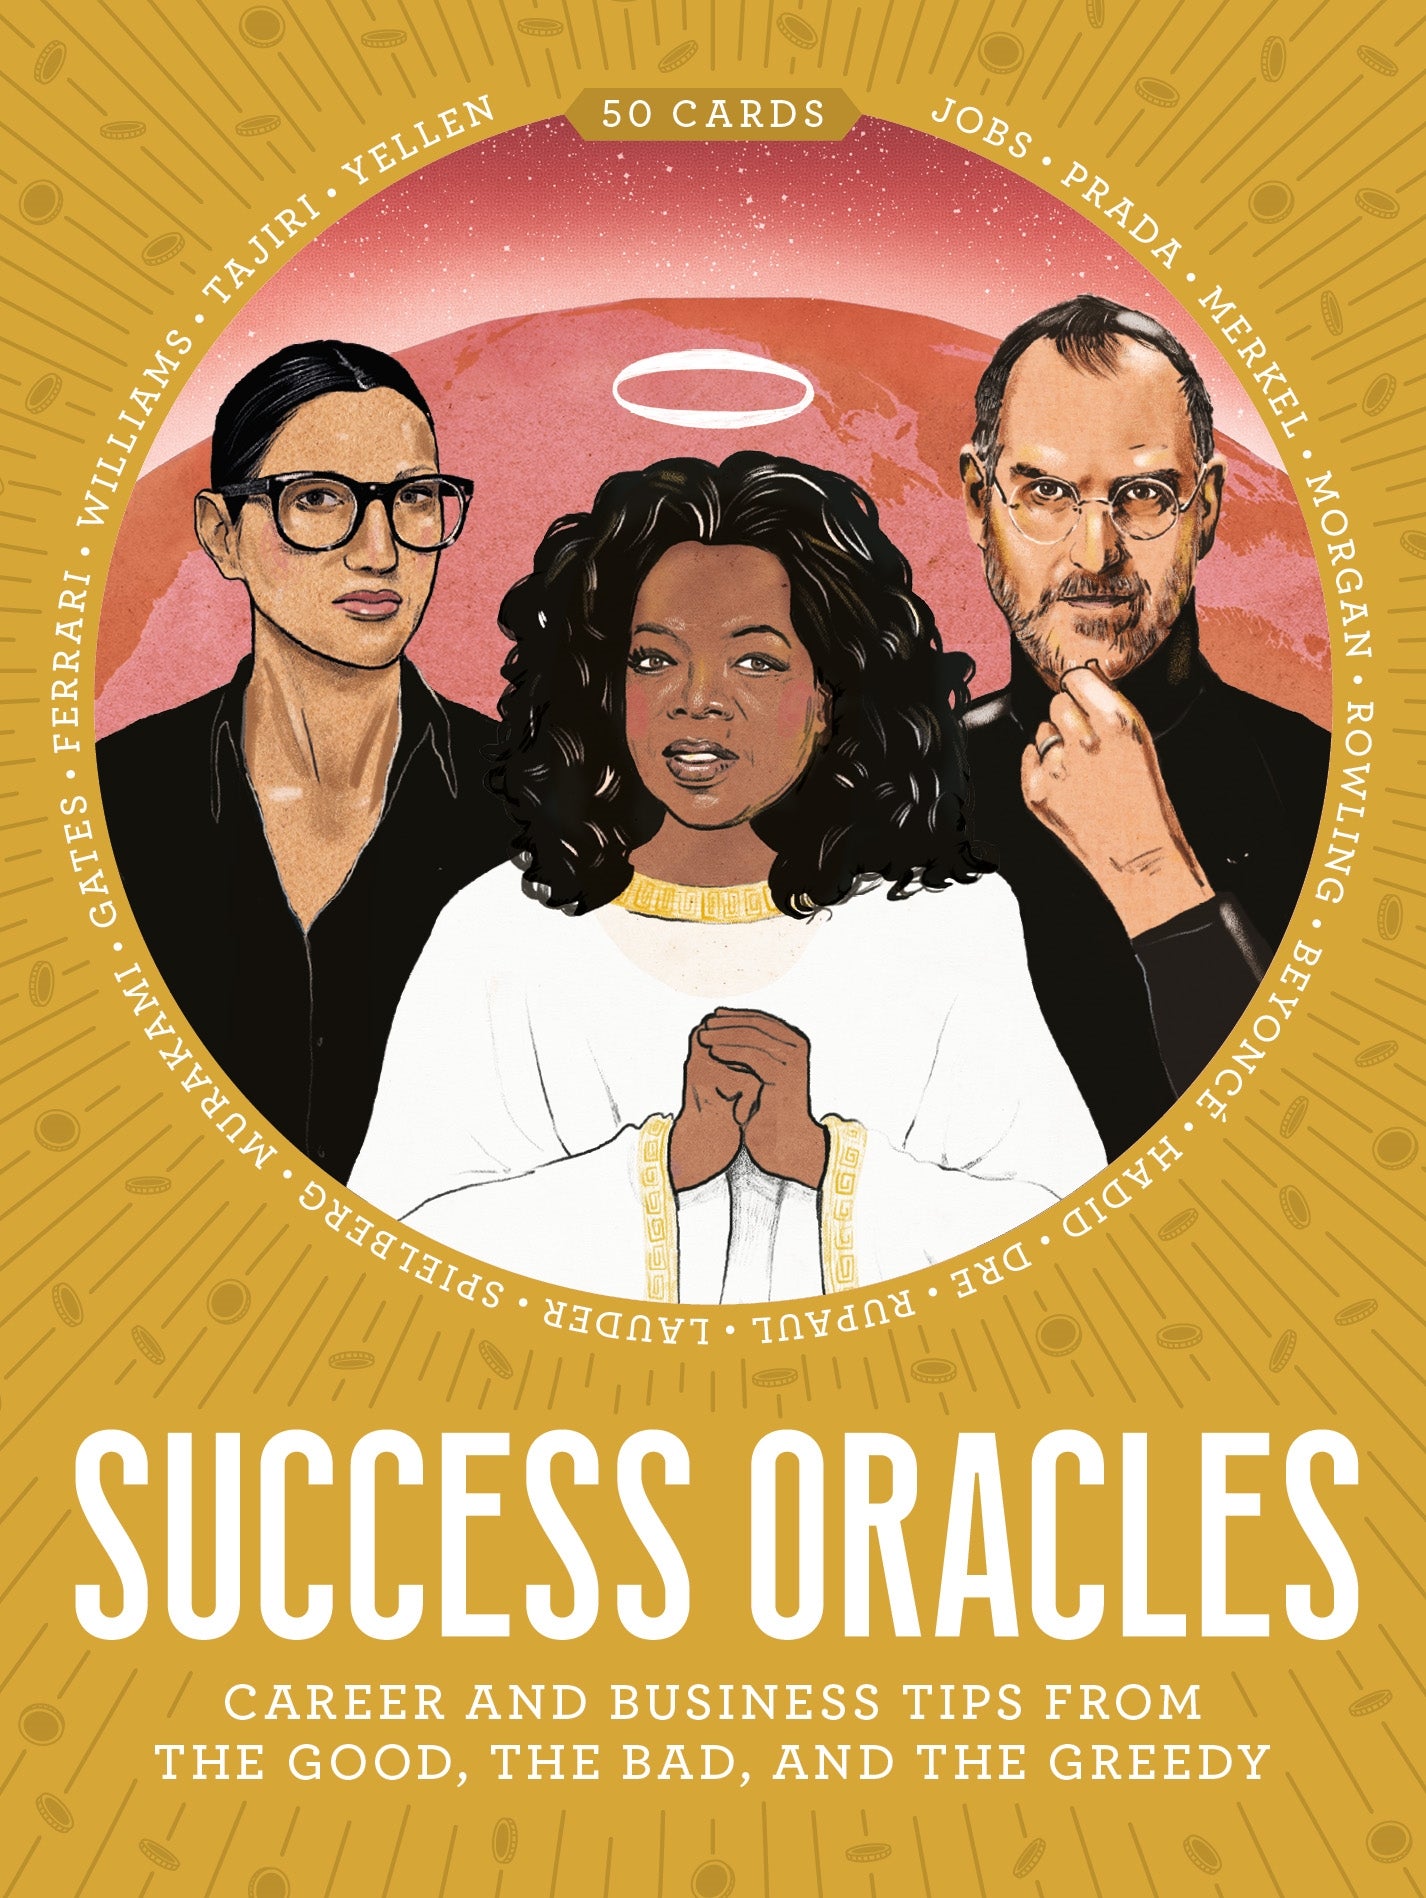 Success Oracles by Barry Falls, Katya Tylevich